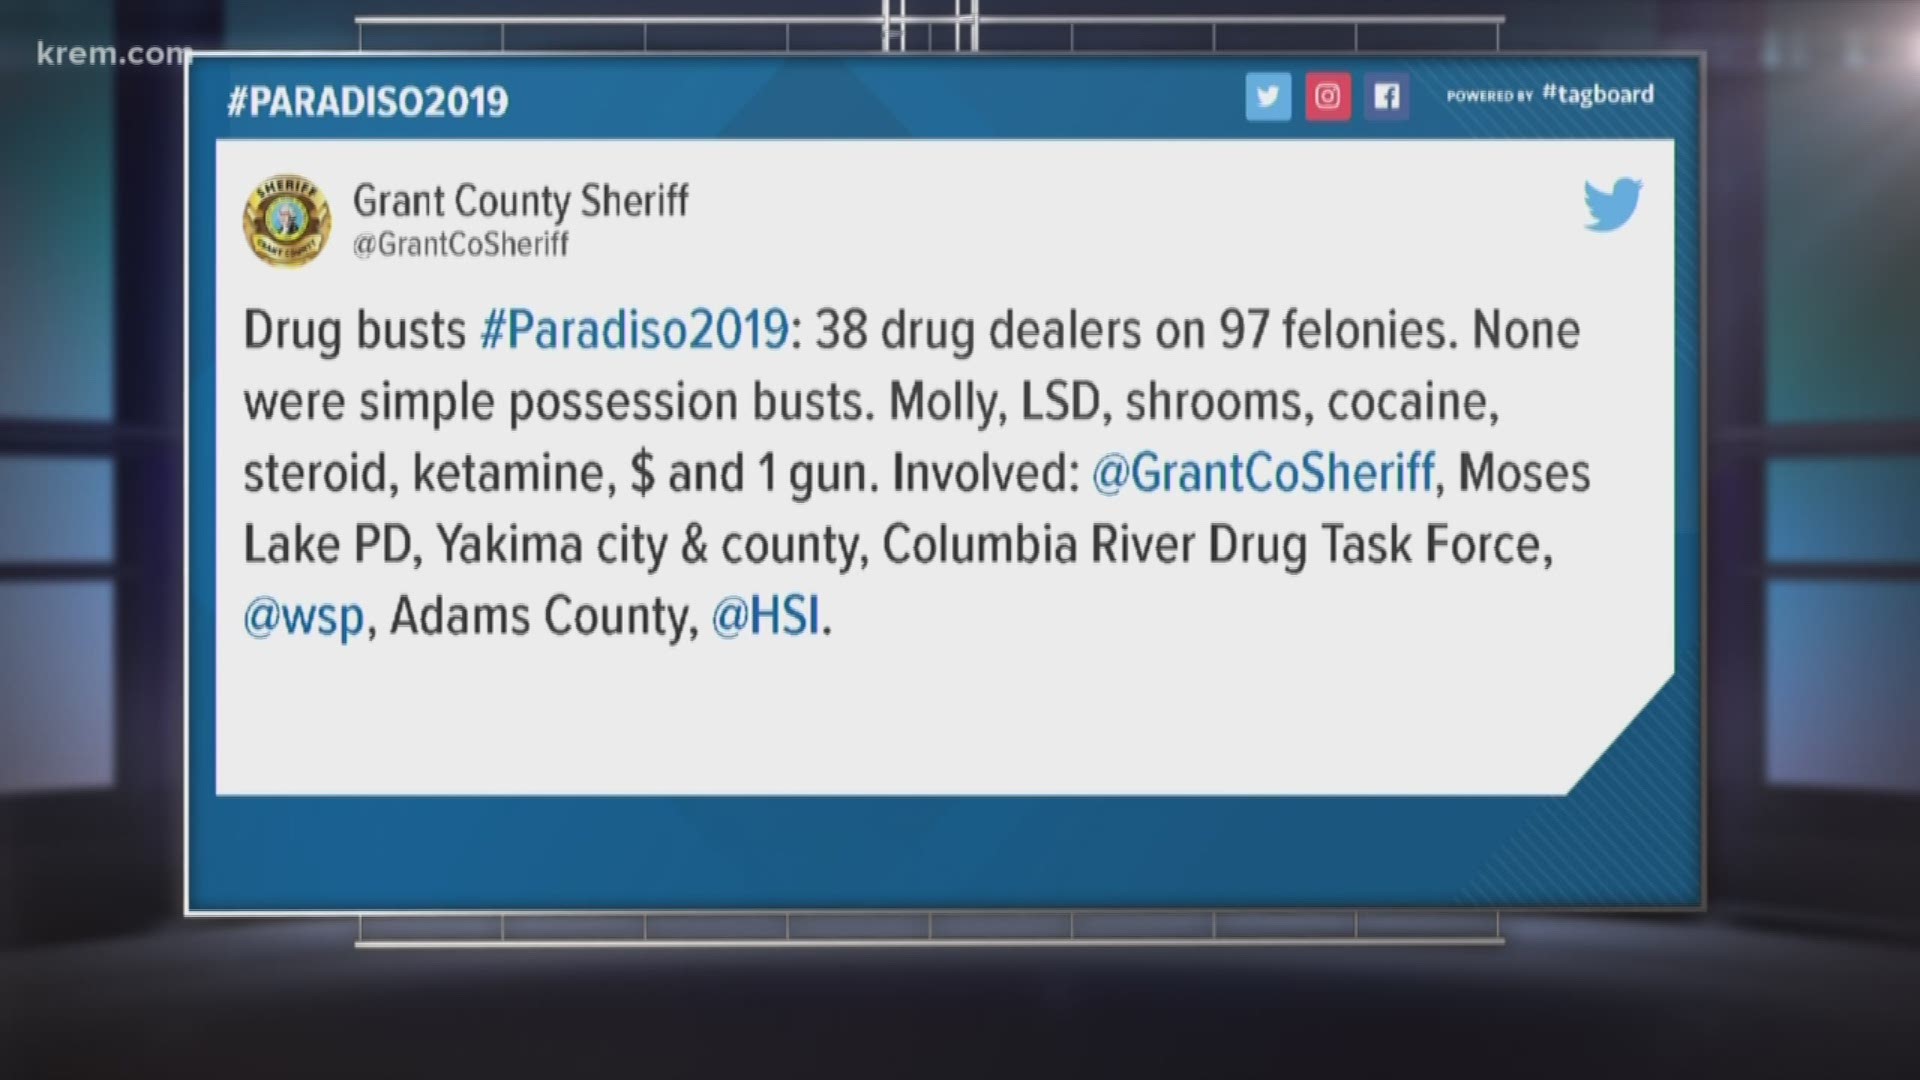 Grant County Sheriff's spokesman Kyle Foreman said the busts included amounts of drugs seen with those delivering or trafficking.